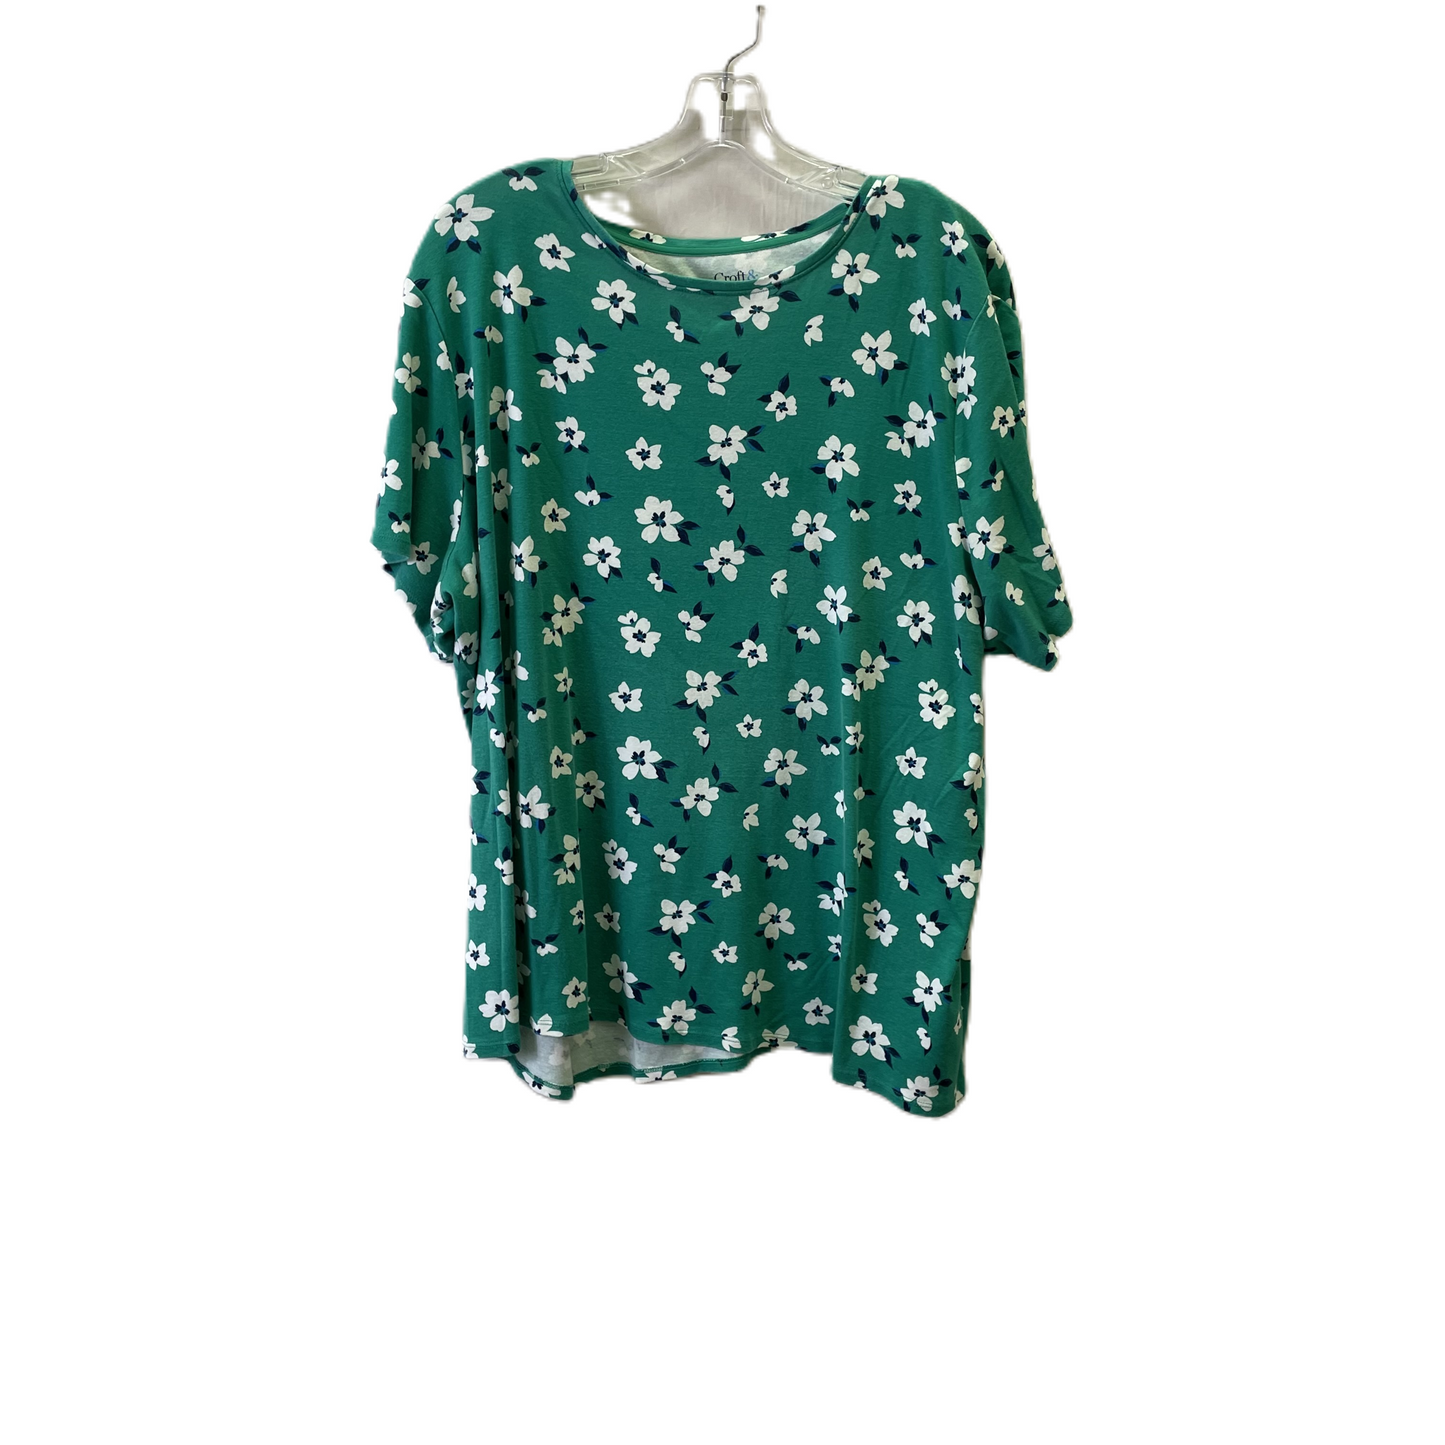 Green Top Short Sleeve Basic By Croft And Barrow, Size: 2x